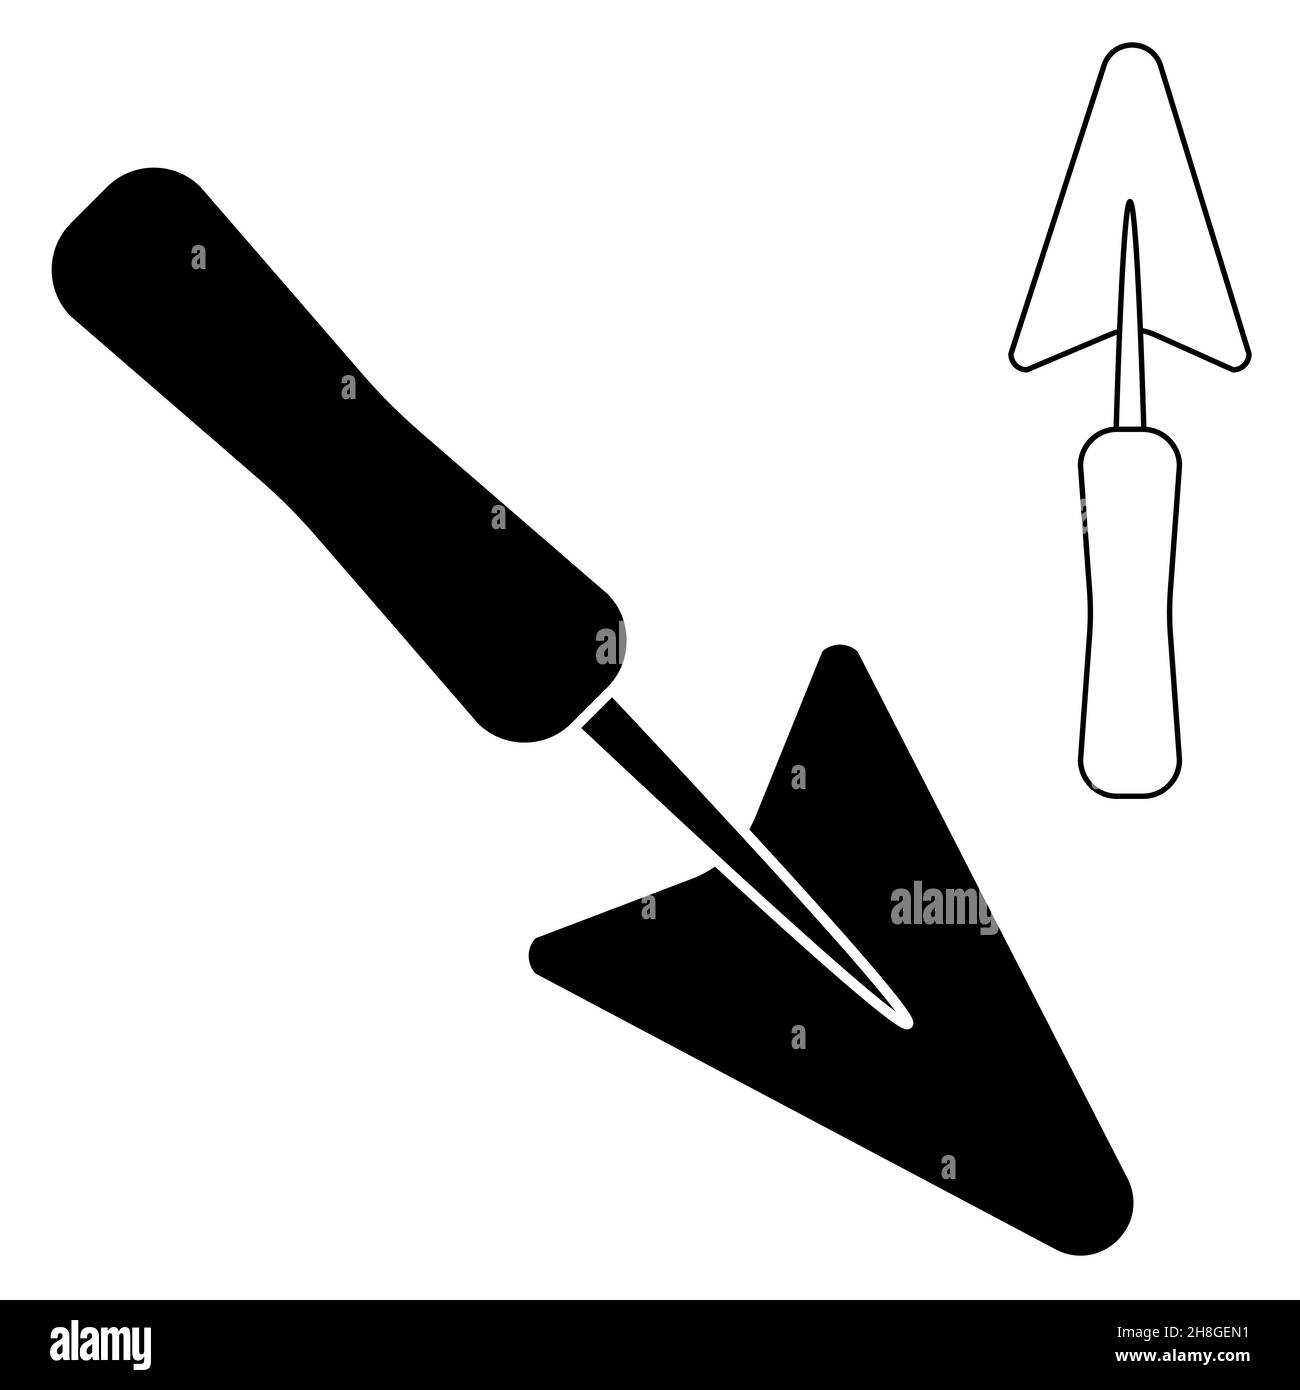 Gardening tools set of trowels outline and negative outline simple minimalistic flat design icon vector illustration isolated on white background Stock Vector